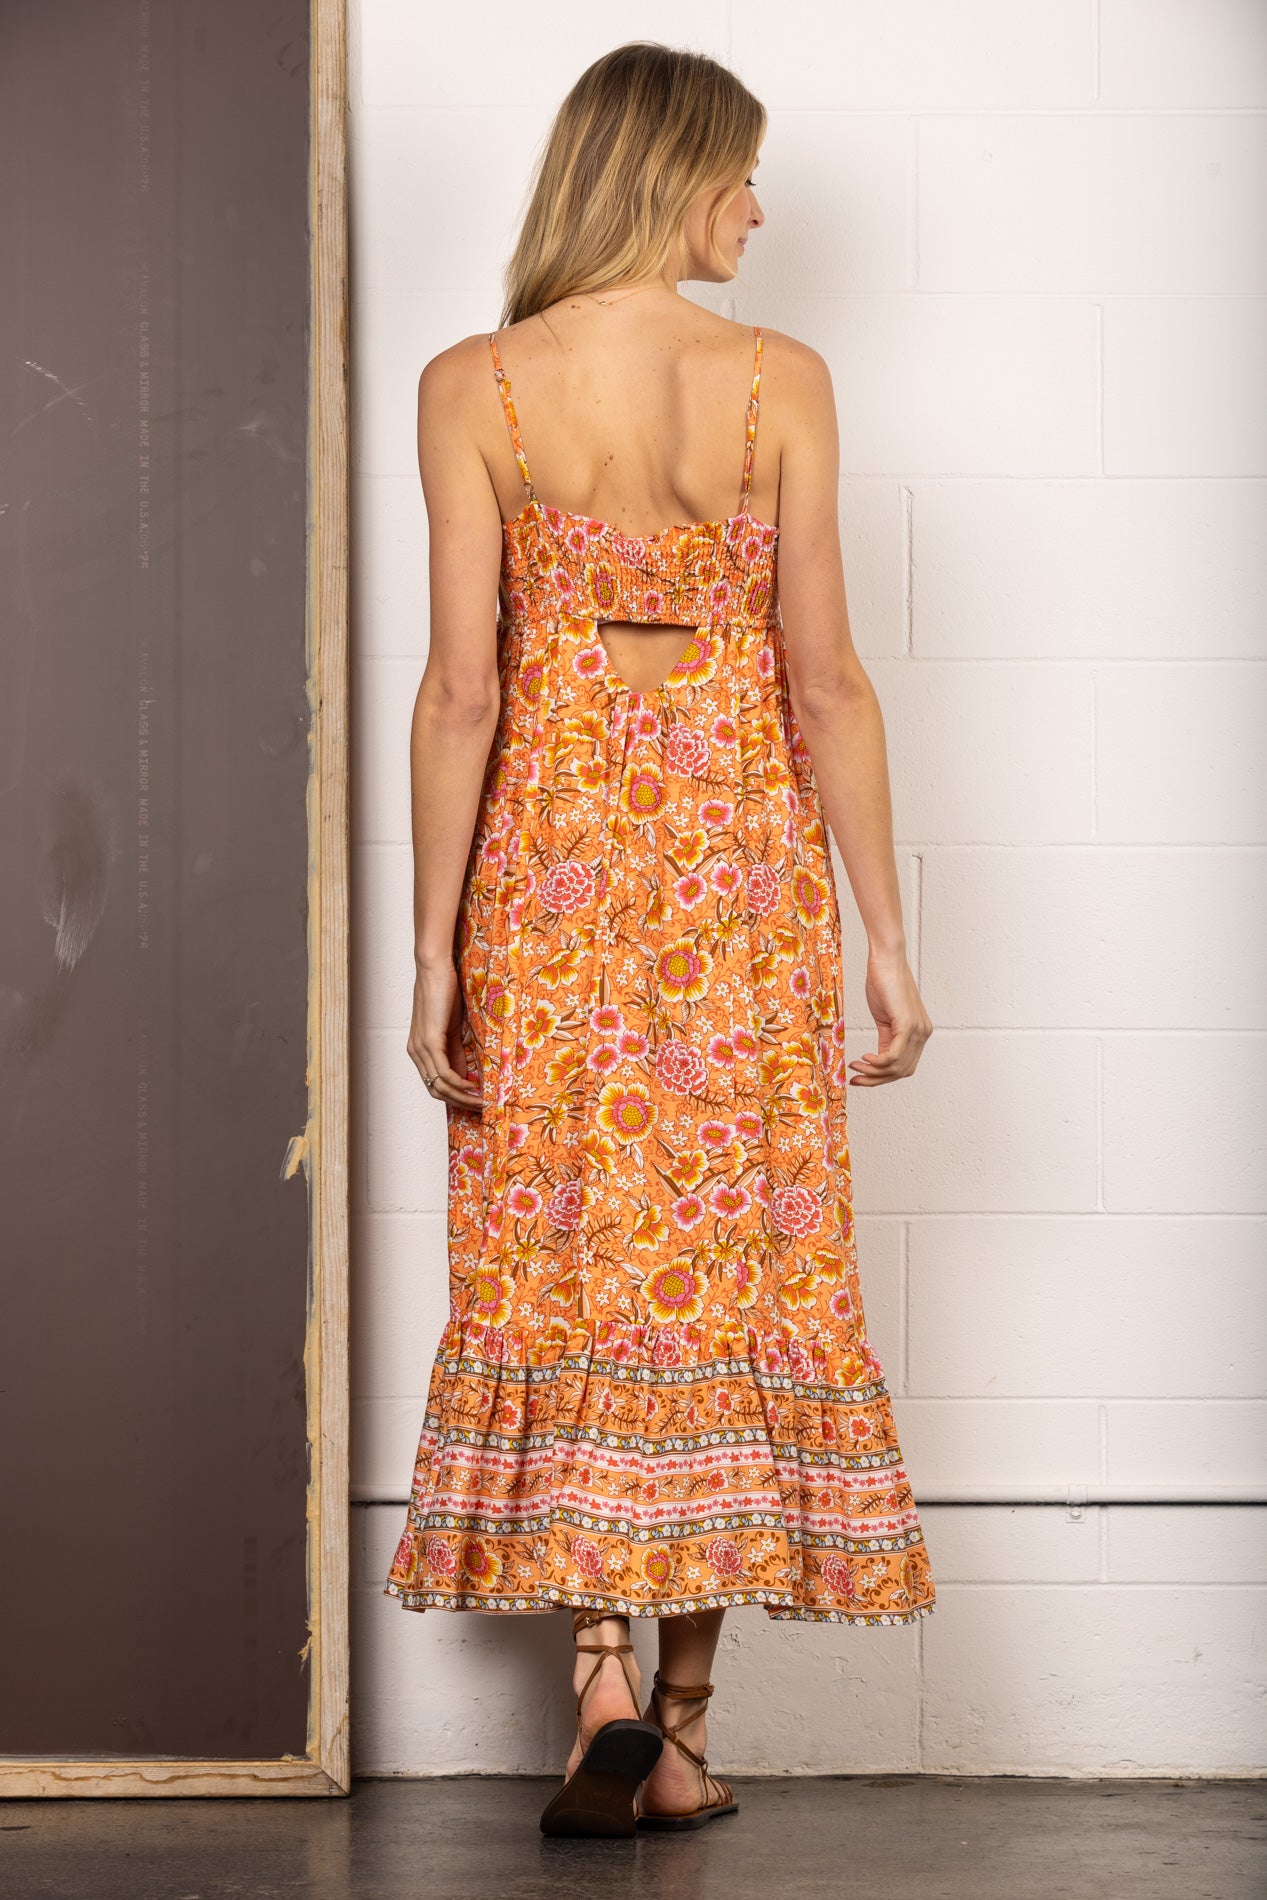 TANGERINE TIERED BUTTON DETAILED MAXI DRESS-HYD0030